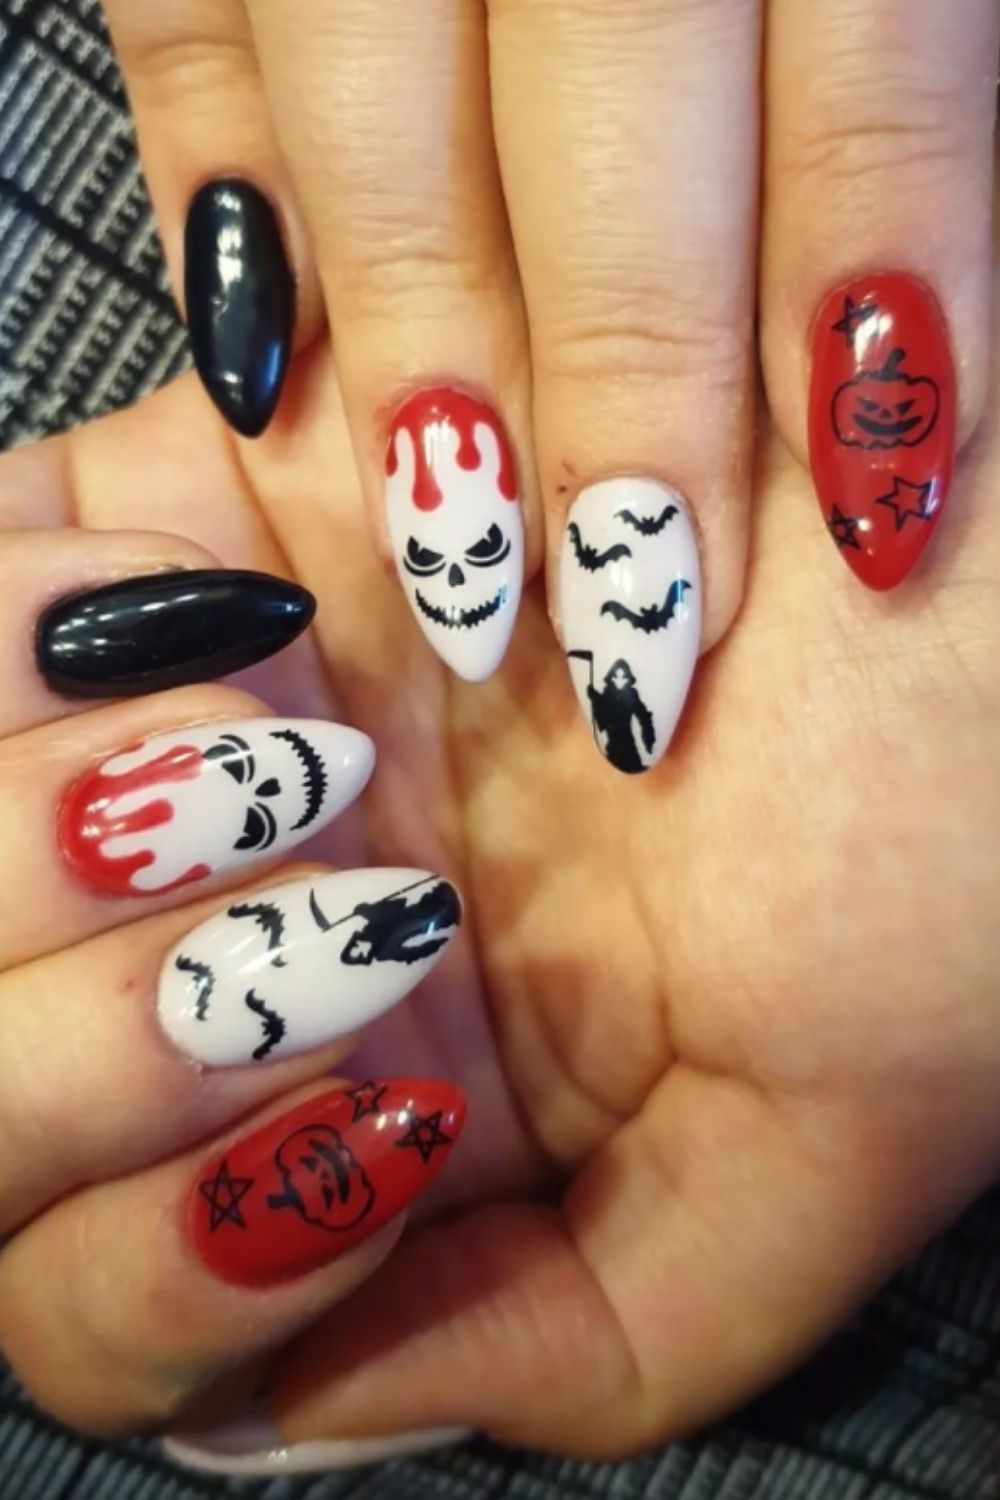 Red and white almond nails art